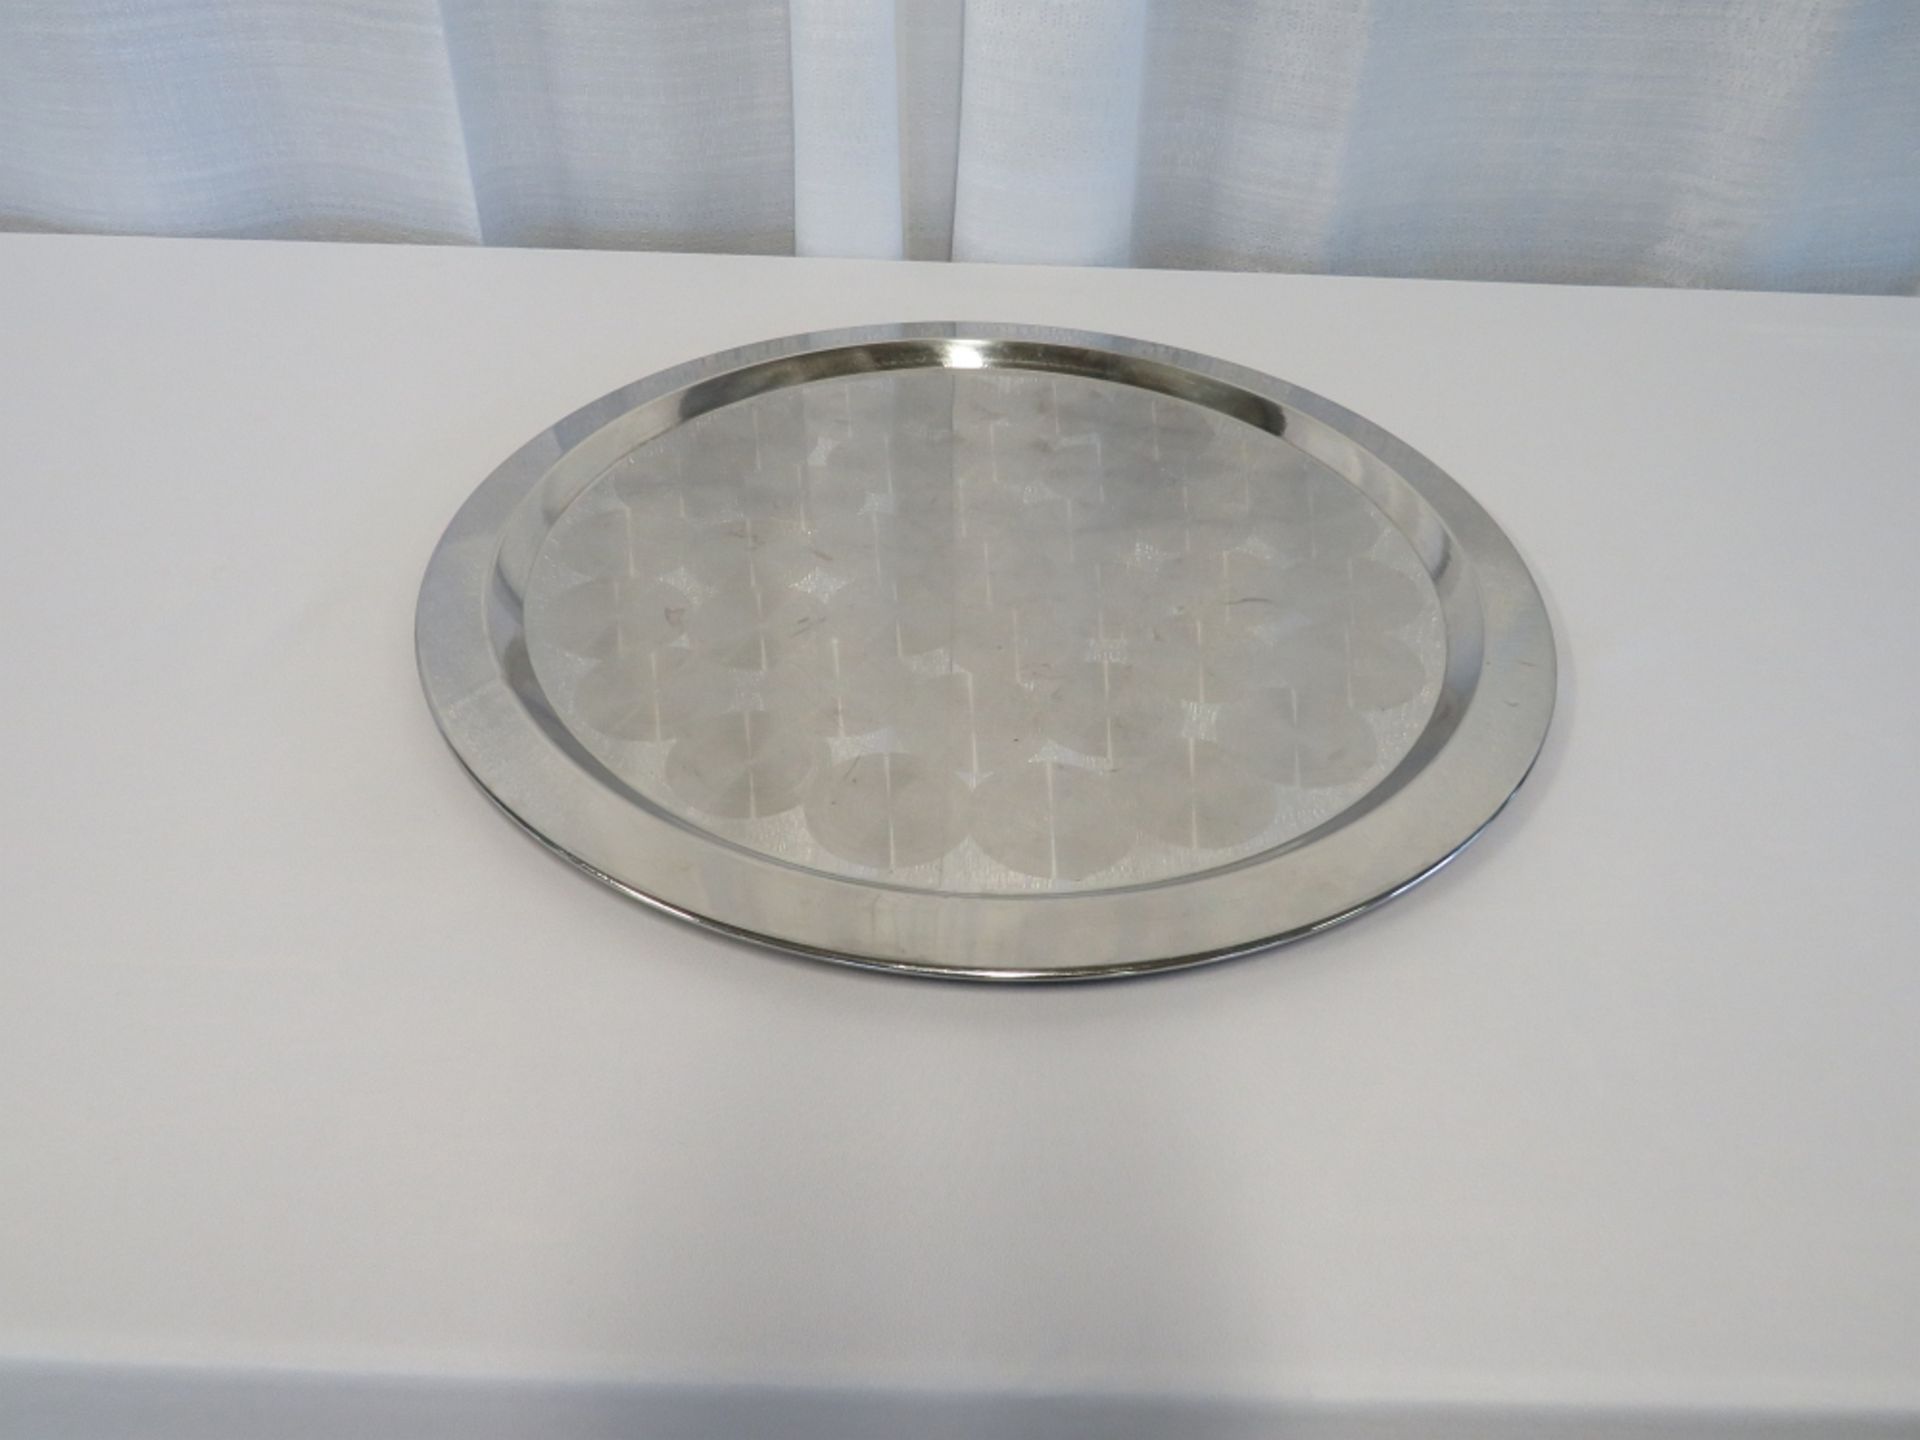 Round Silver Plate Serving Tray